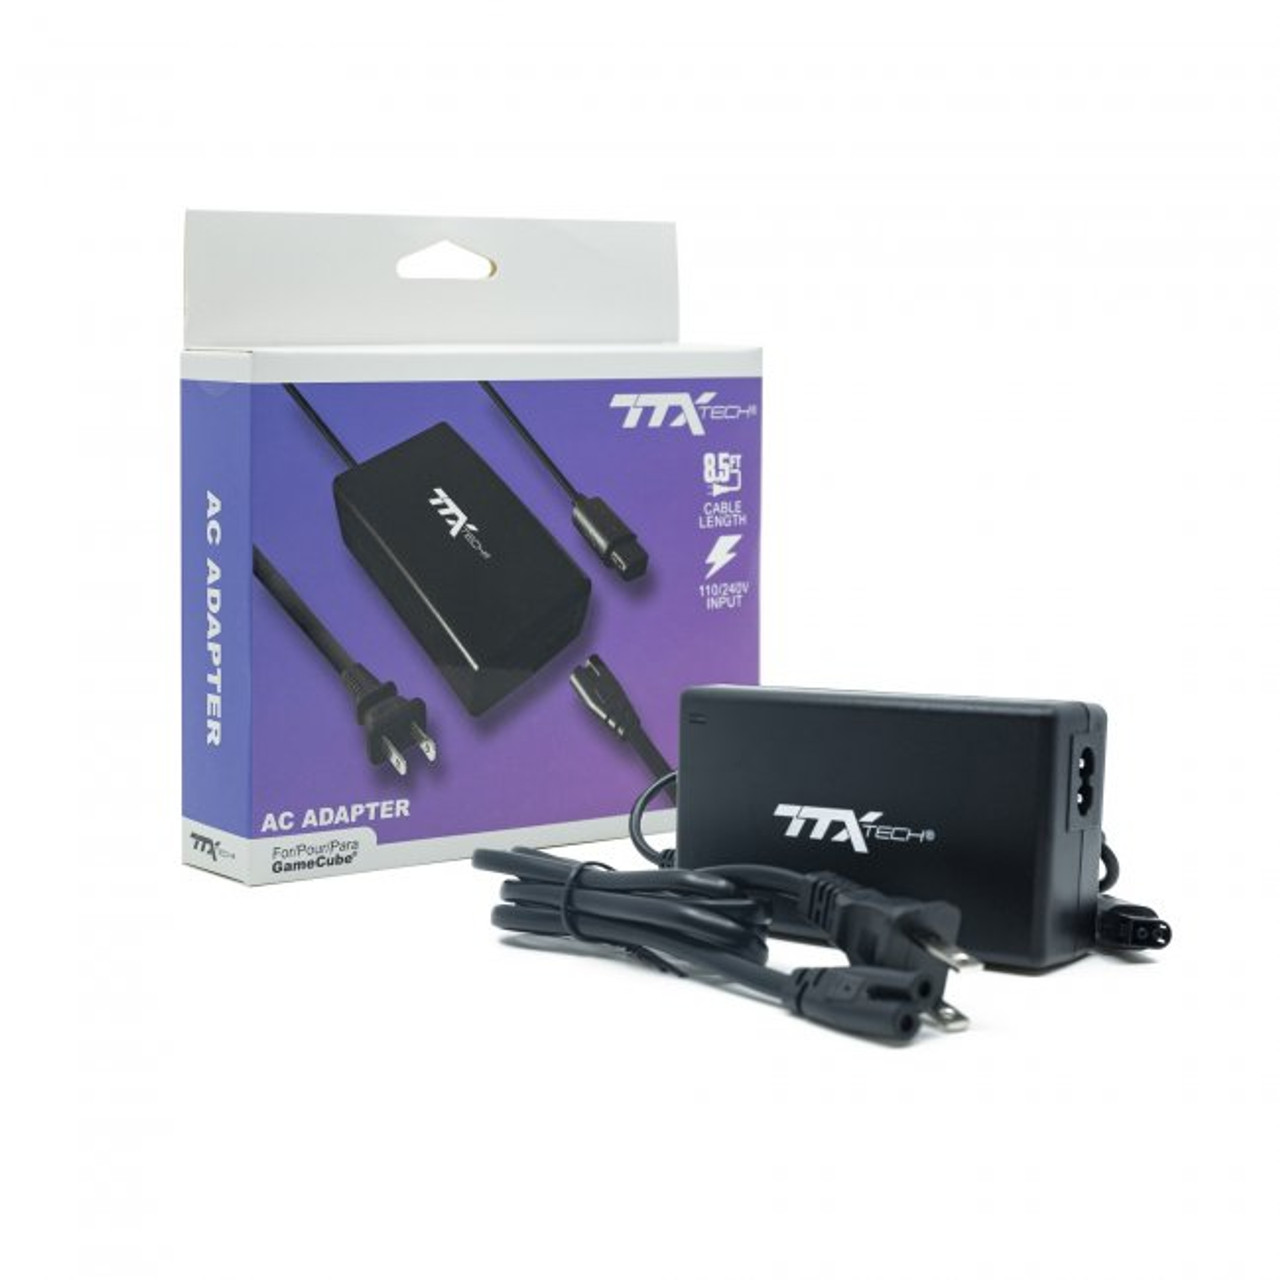 AC Power Adapter for GameCube - TTX - Stone Age Gamer